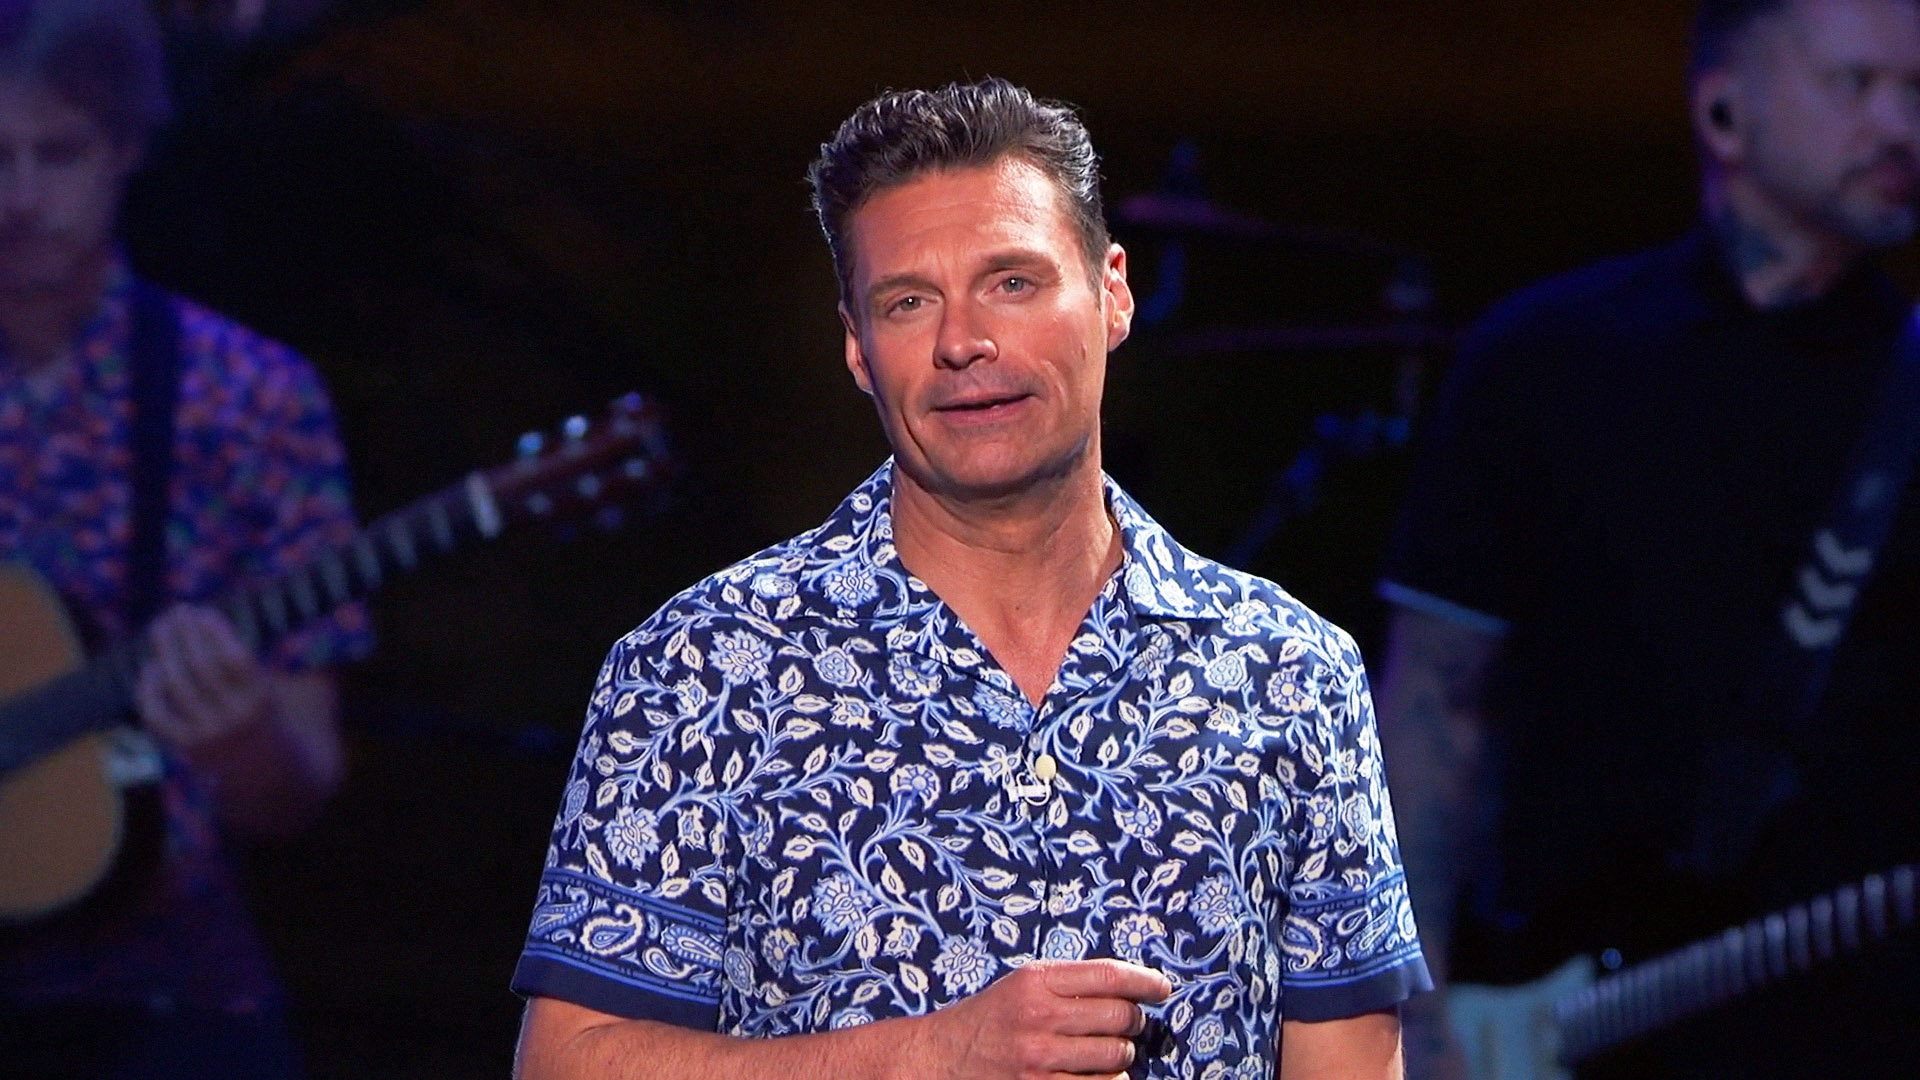 Ryan Seacrest Faces Another Backlash After Being 'Nasty' to American Idol Contestants